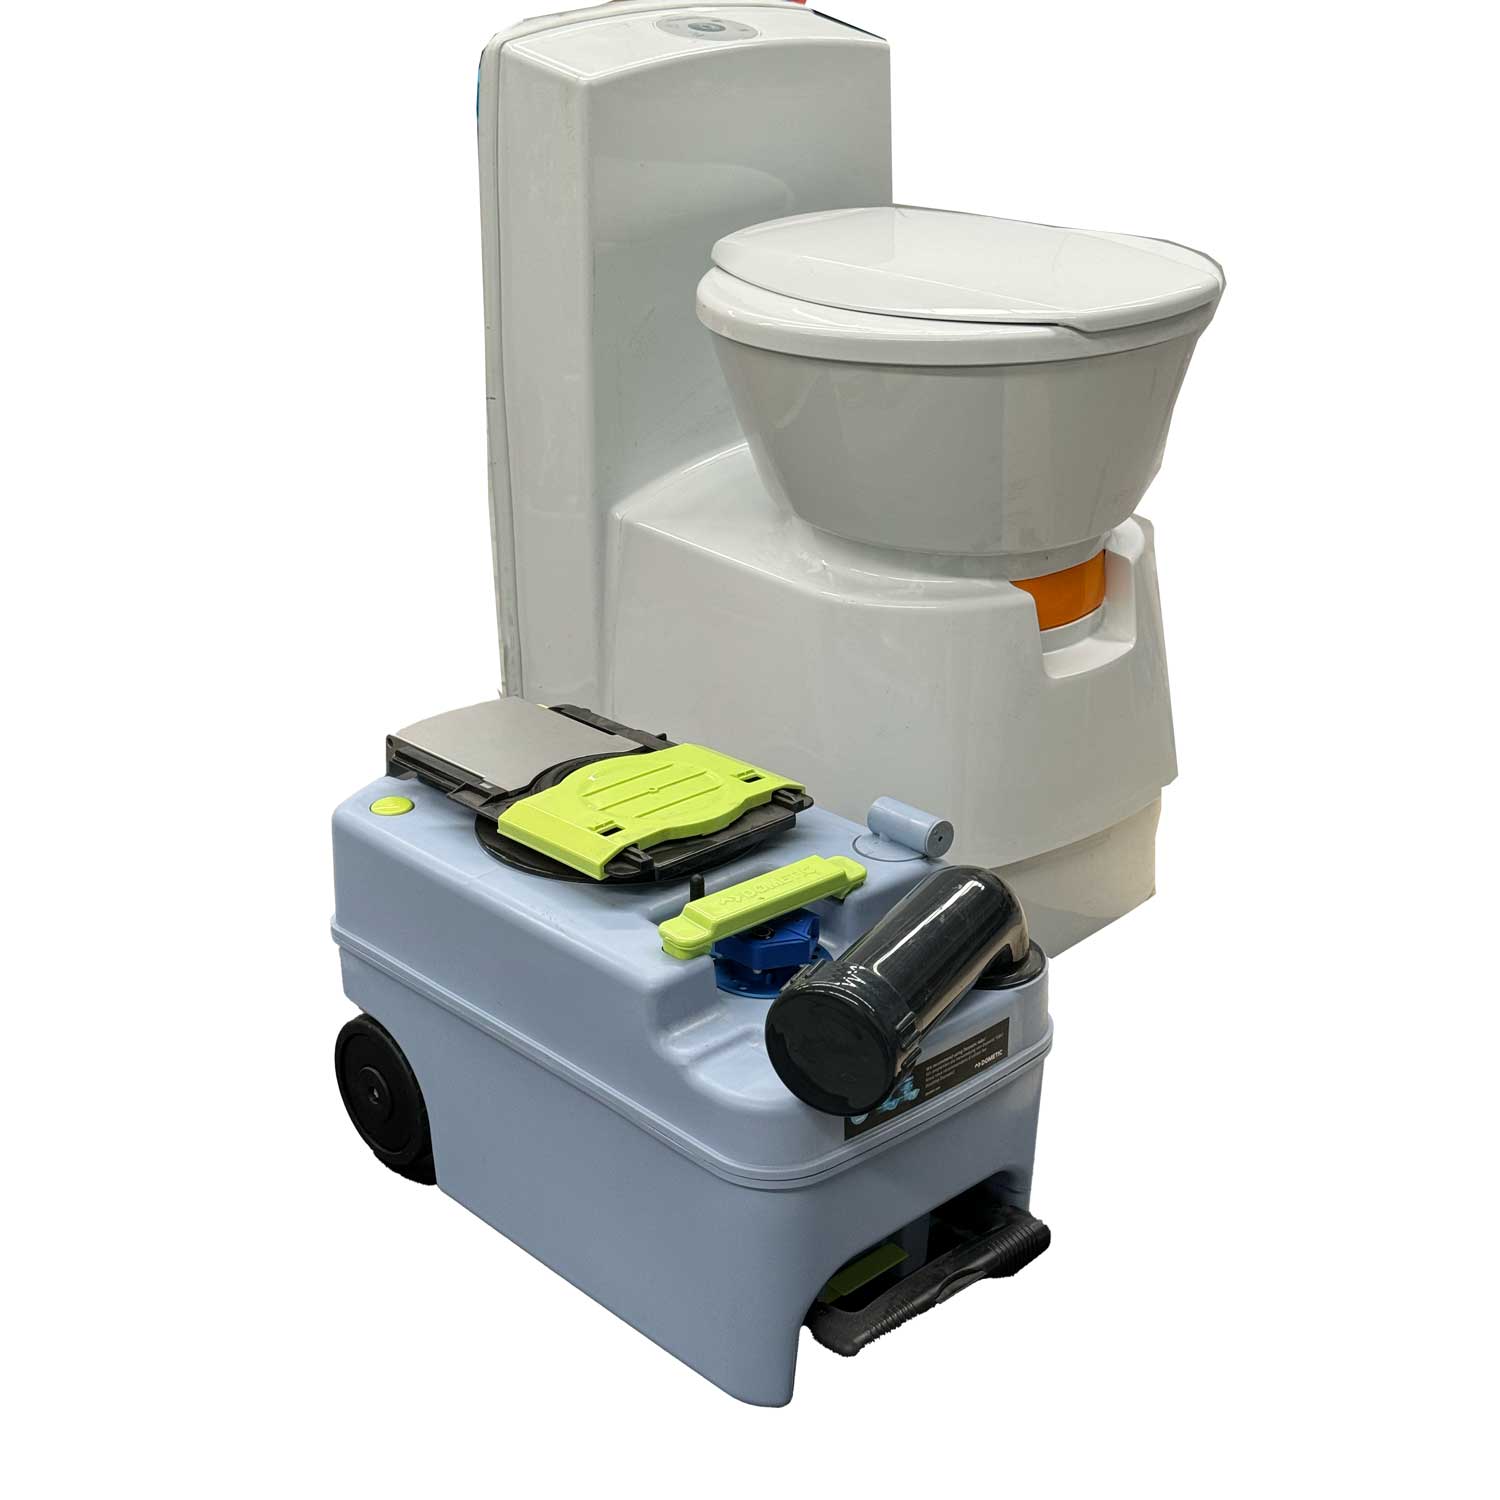 CASETTE TOILET LEVEL WITH SAFIERY STAR-TANK RADAR SENSOR BATTERY BLUETOOTH TO VICTRON DISPLAY